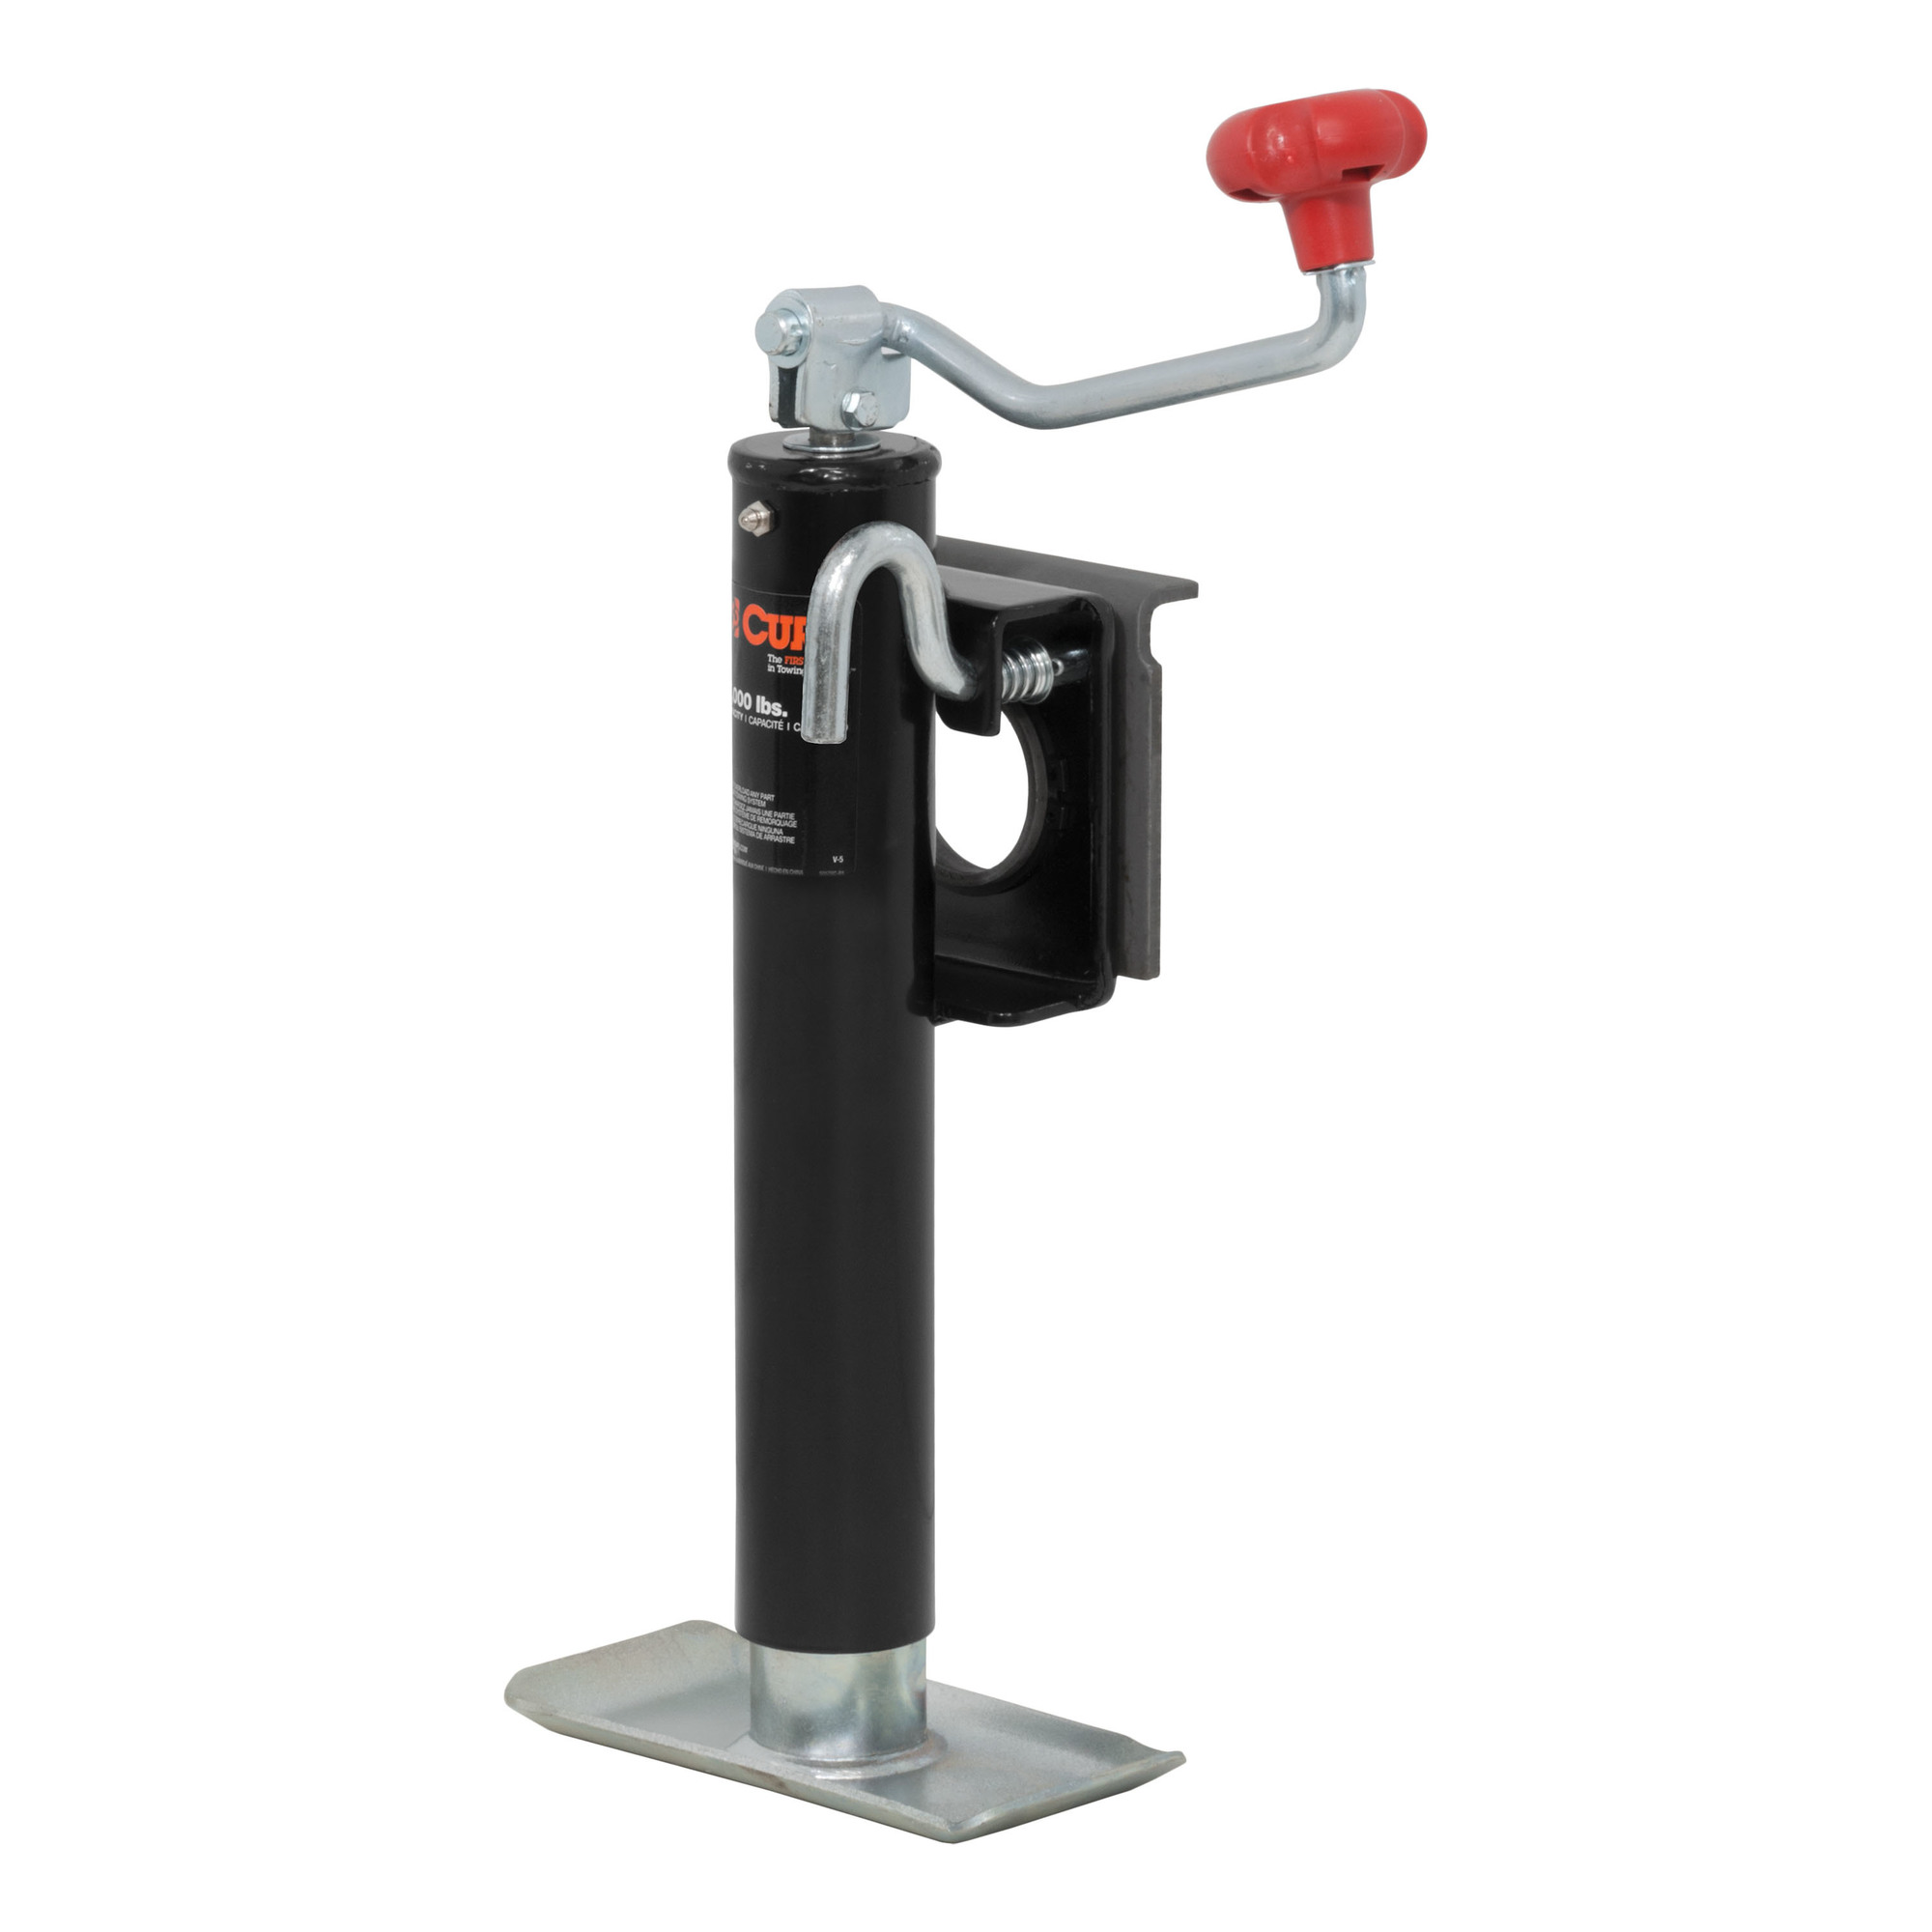 Curt Manufacturing, Bracket-Mnt Jack w Top Handle 2000 lbs 10Inch Travel, Lift Capacity 2000 lb, Jack Type Topwind, Mount Type Weld-On, Model 28300